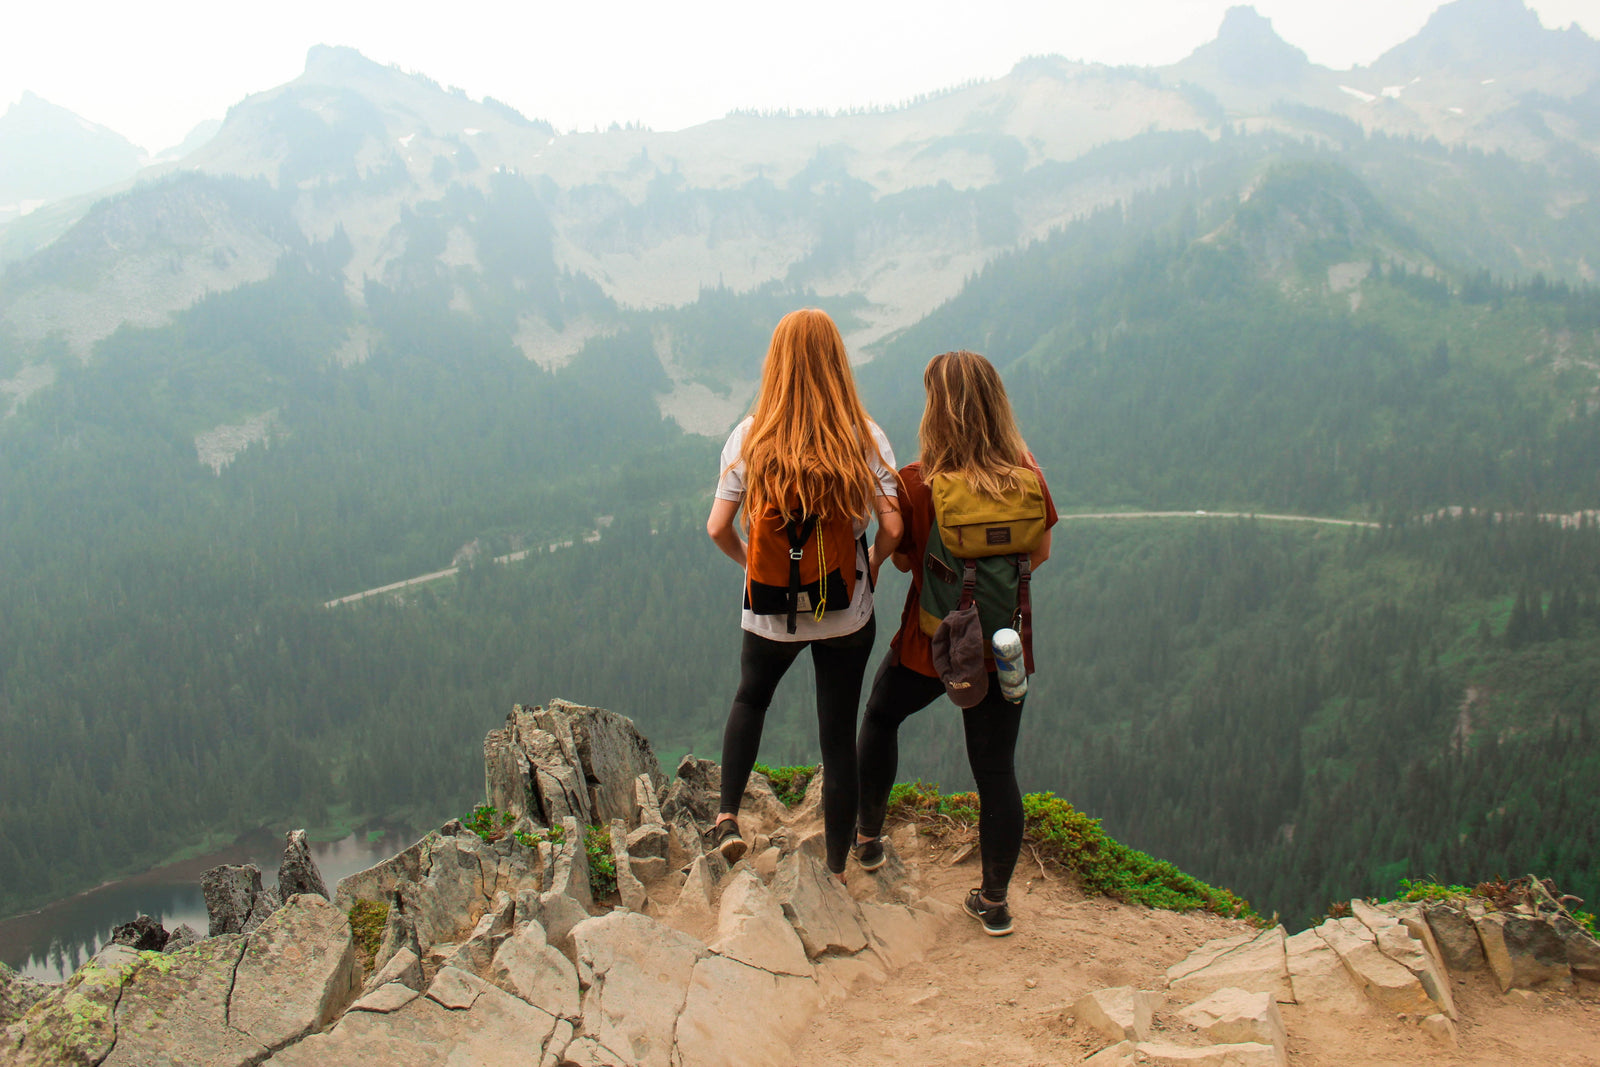 Two girls on mountaintop - by Kalisa Veer with Unsplash